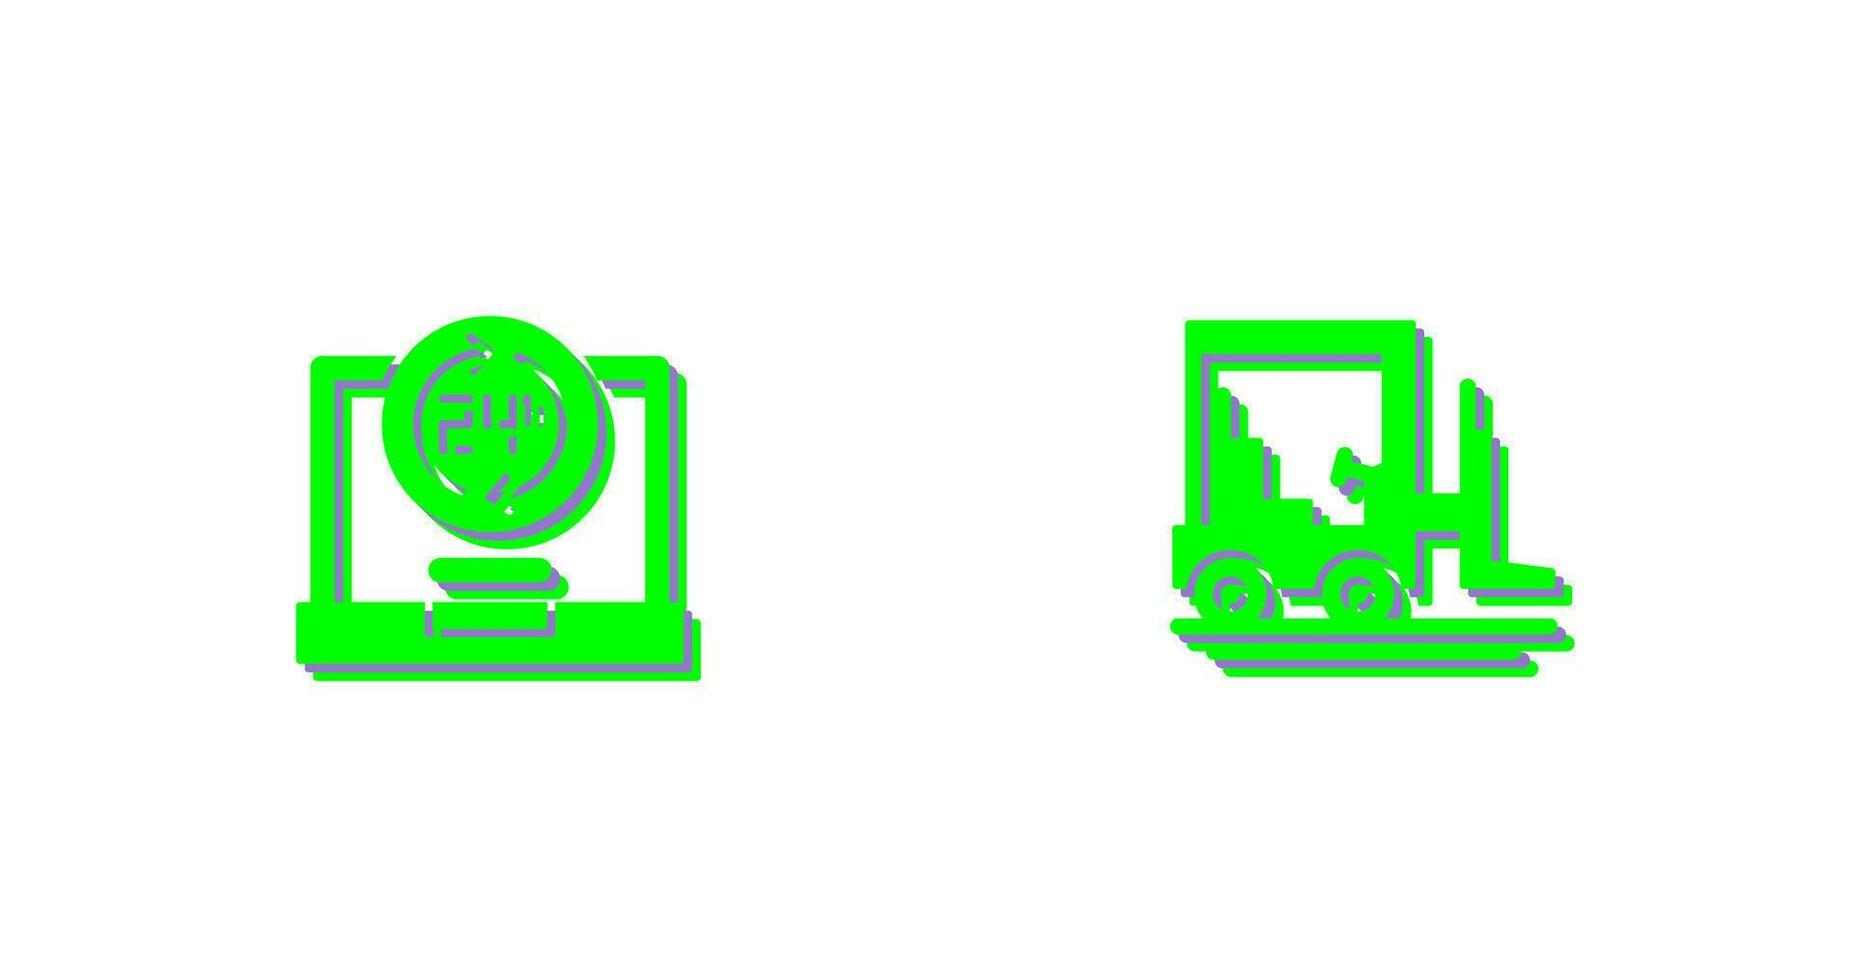 24 hours and forklift Icon vector